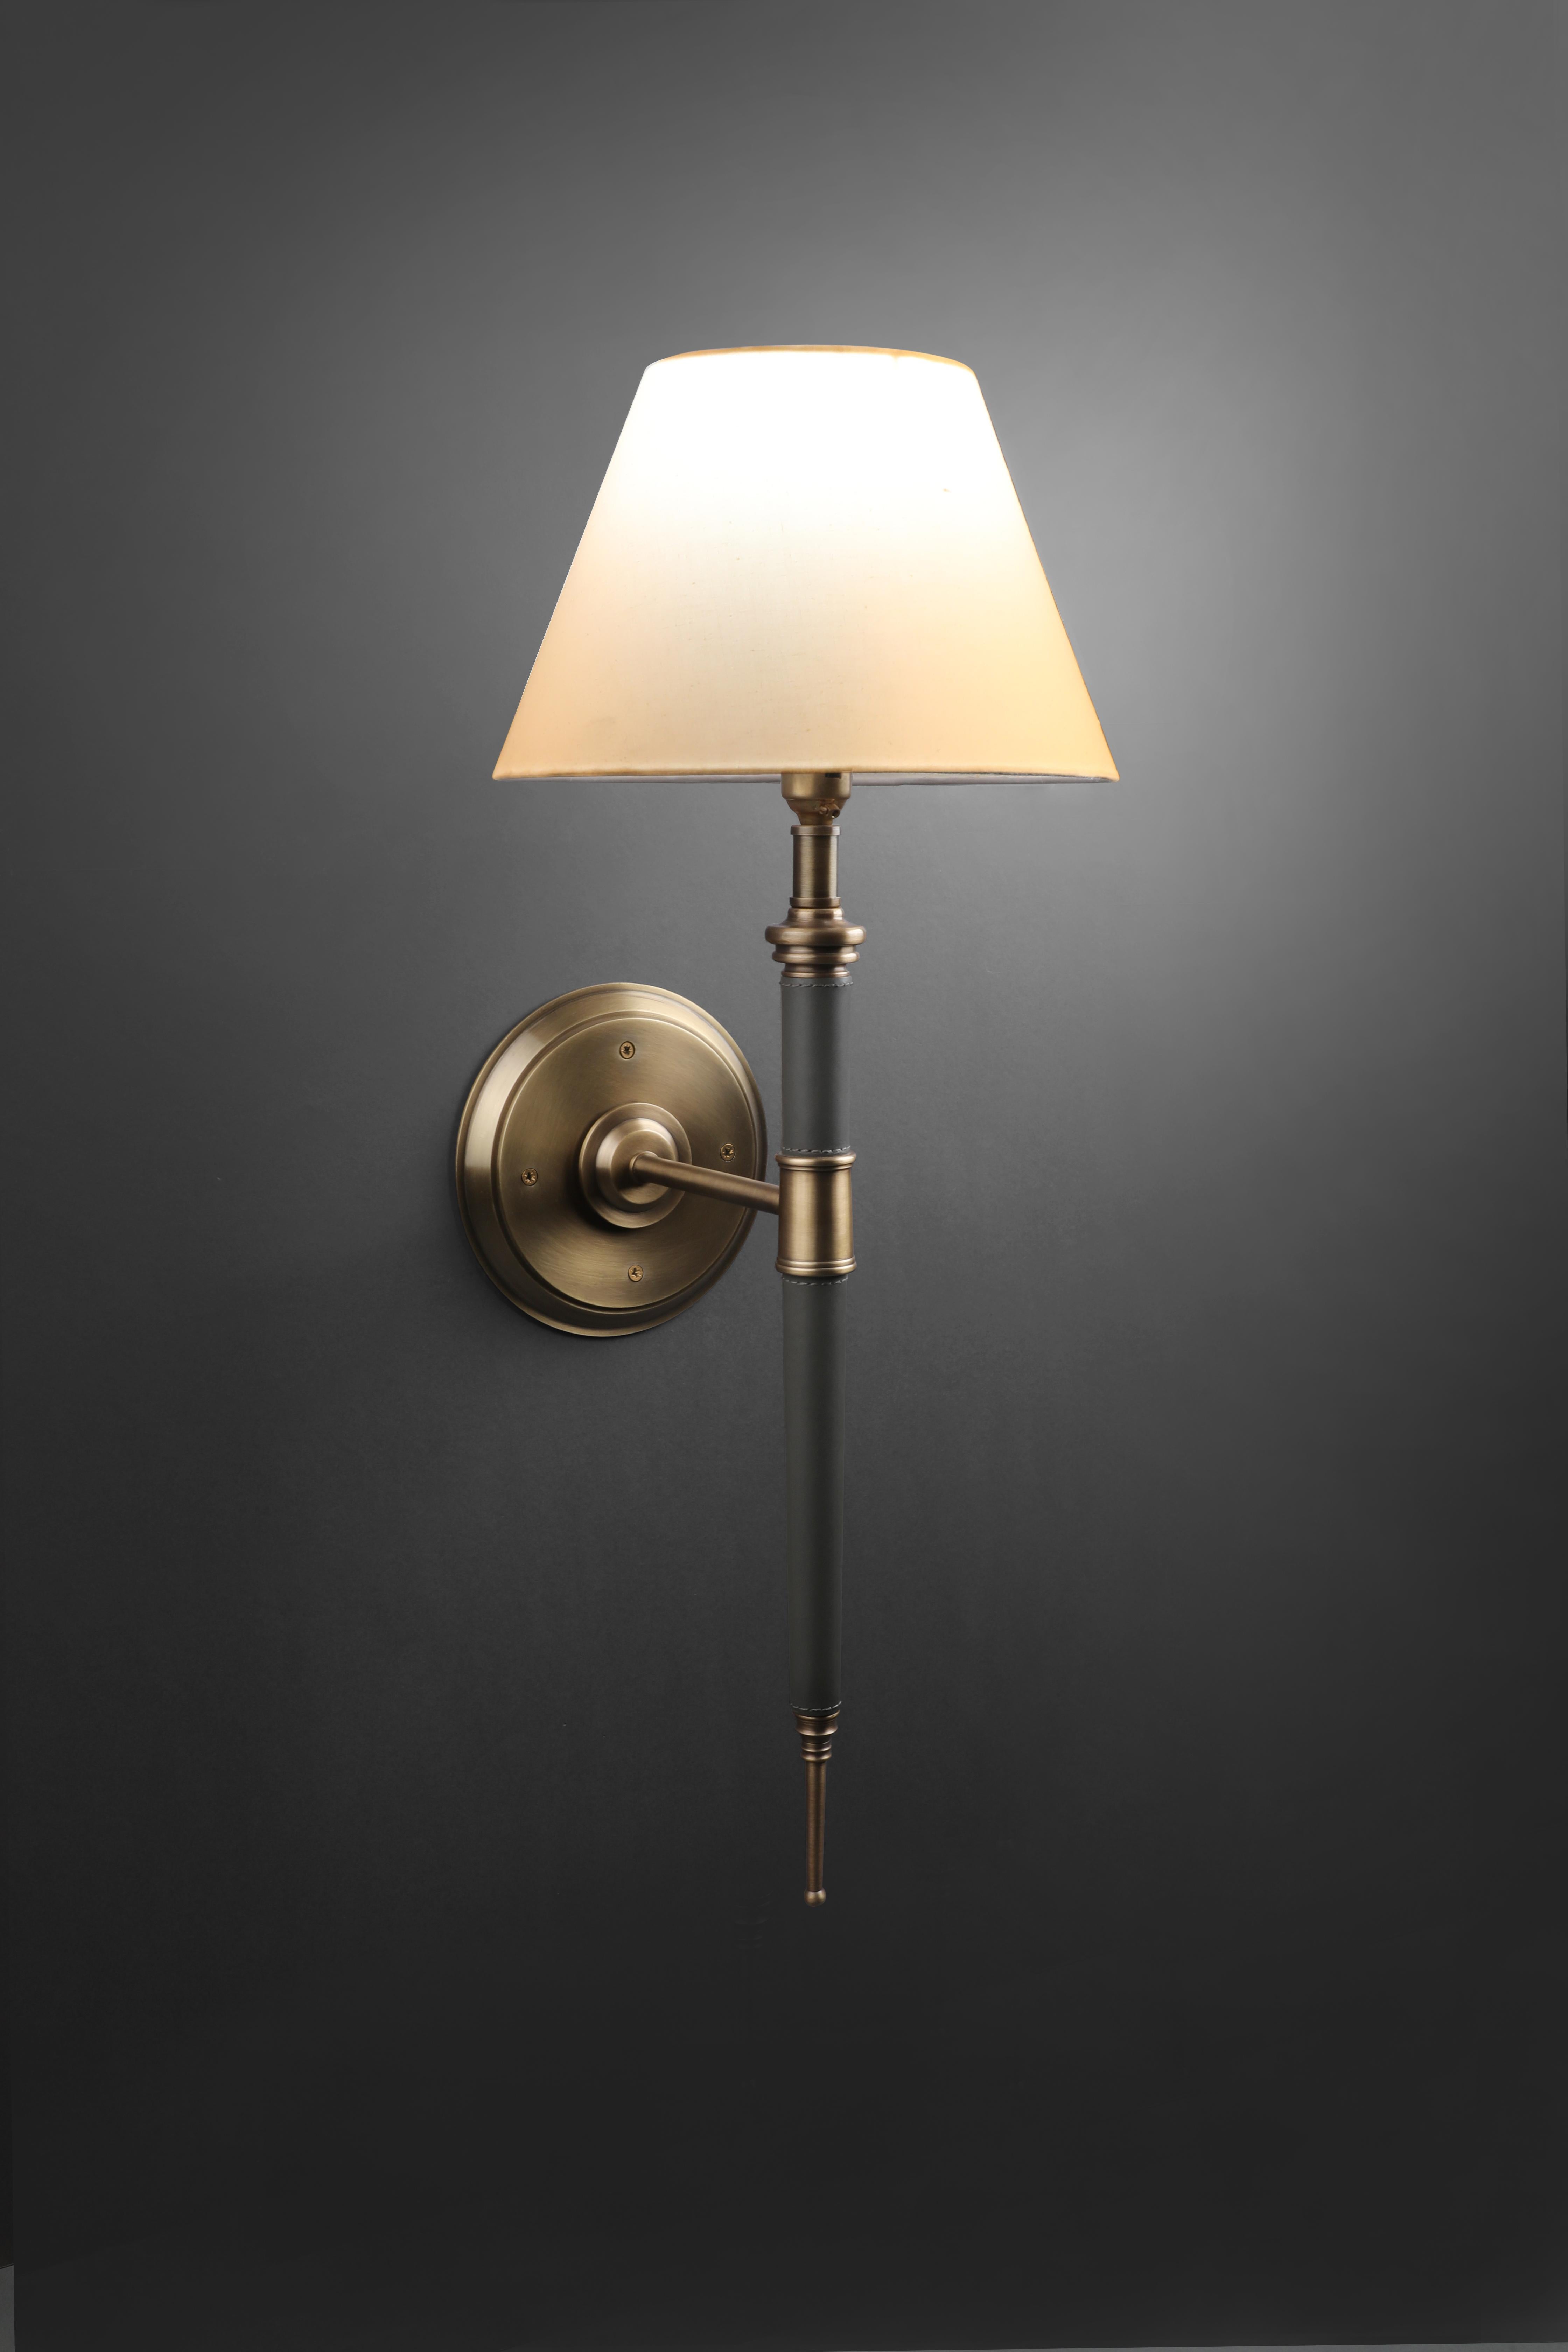 Astrelli wall sconce by Madheke
Dimensions: W 25 x D 30 x H 64 cm.
Materials: Brushed antique bronze body with leather encasing detail.

All our lamps can be wired according to each country. If sold to the USA it will be wired for the USA for